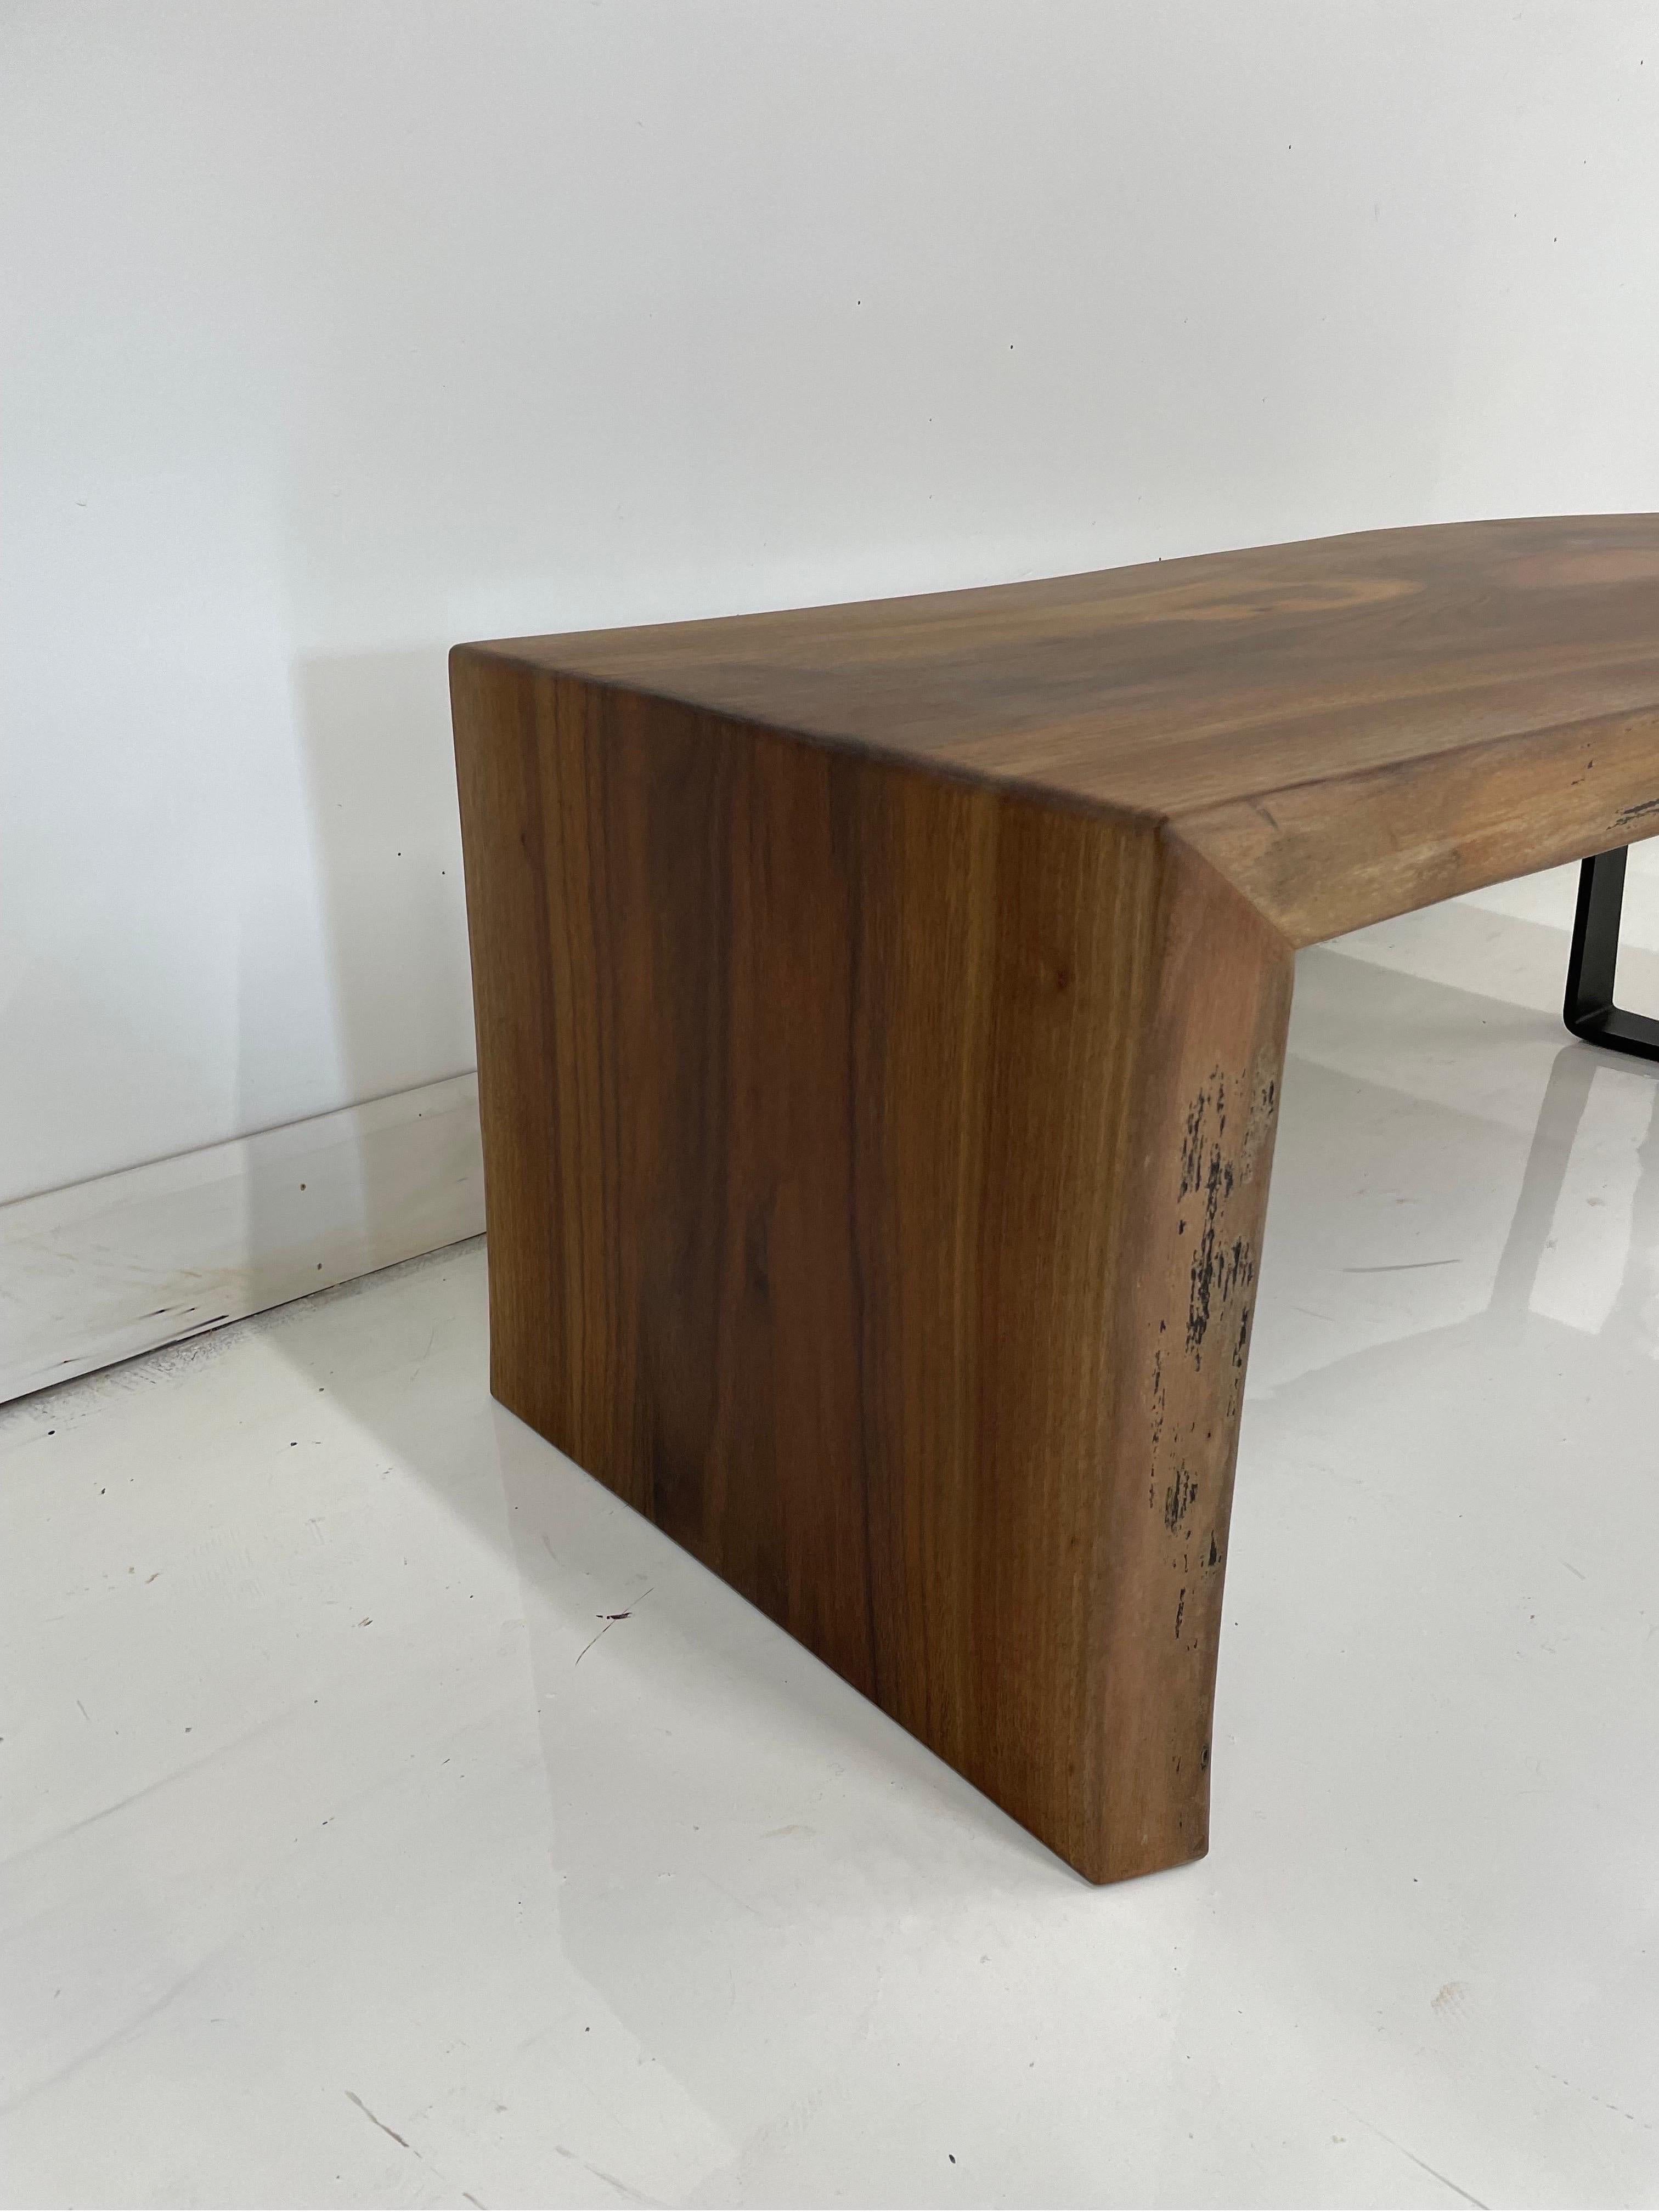 Single slab walnut live edge coffee table with waterfall leg. Starting out as a single slab of walnut, the waterfall leg was meticulously crafted to create a seamless look and have the grain flow over the top and into the leg. 

The opposite side